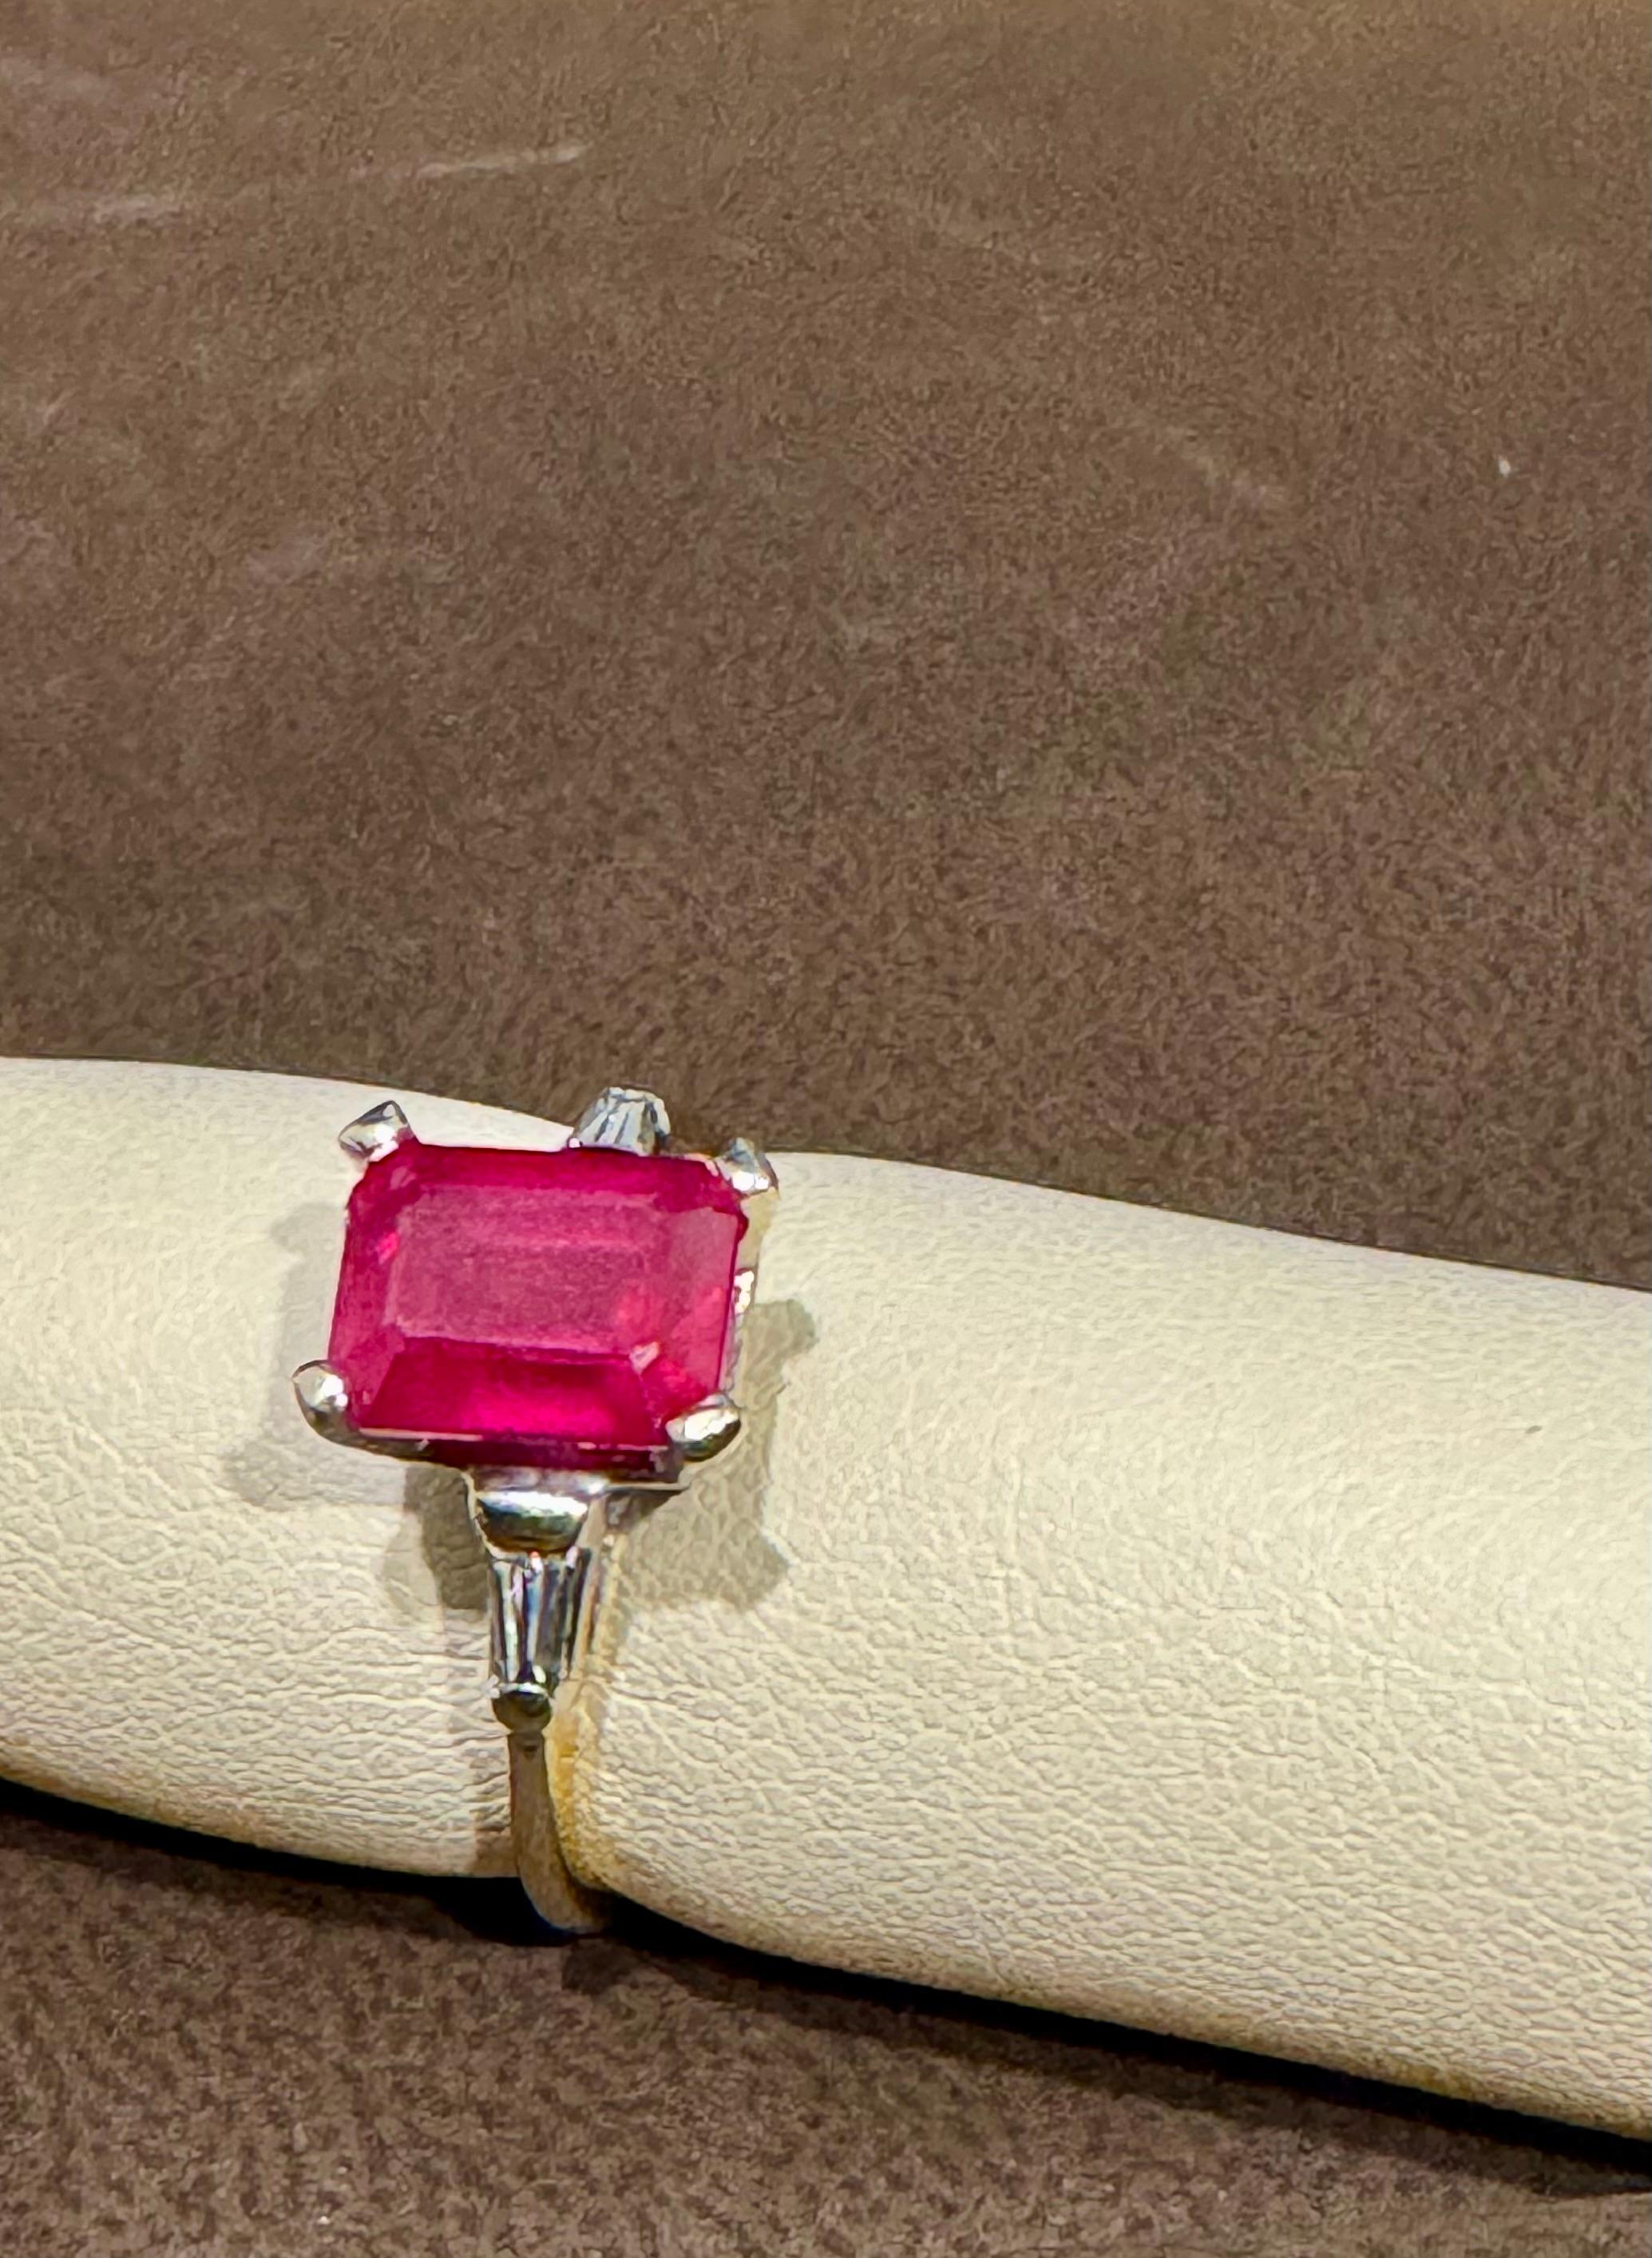 Taille ovale 2.5 Ct Emerald Cut Treated Ruby & 0.15 ct Diamond Ring 14 Kt White Gold Size 5 en vente